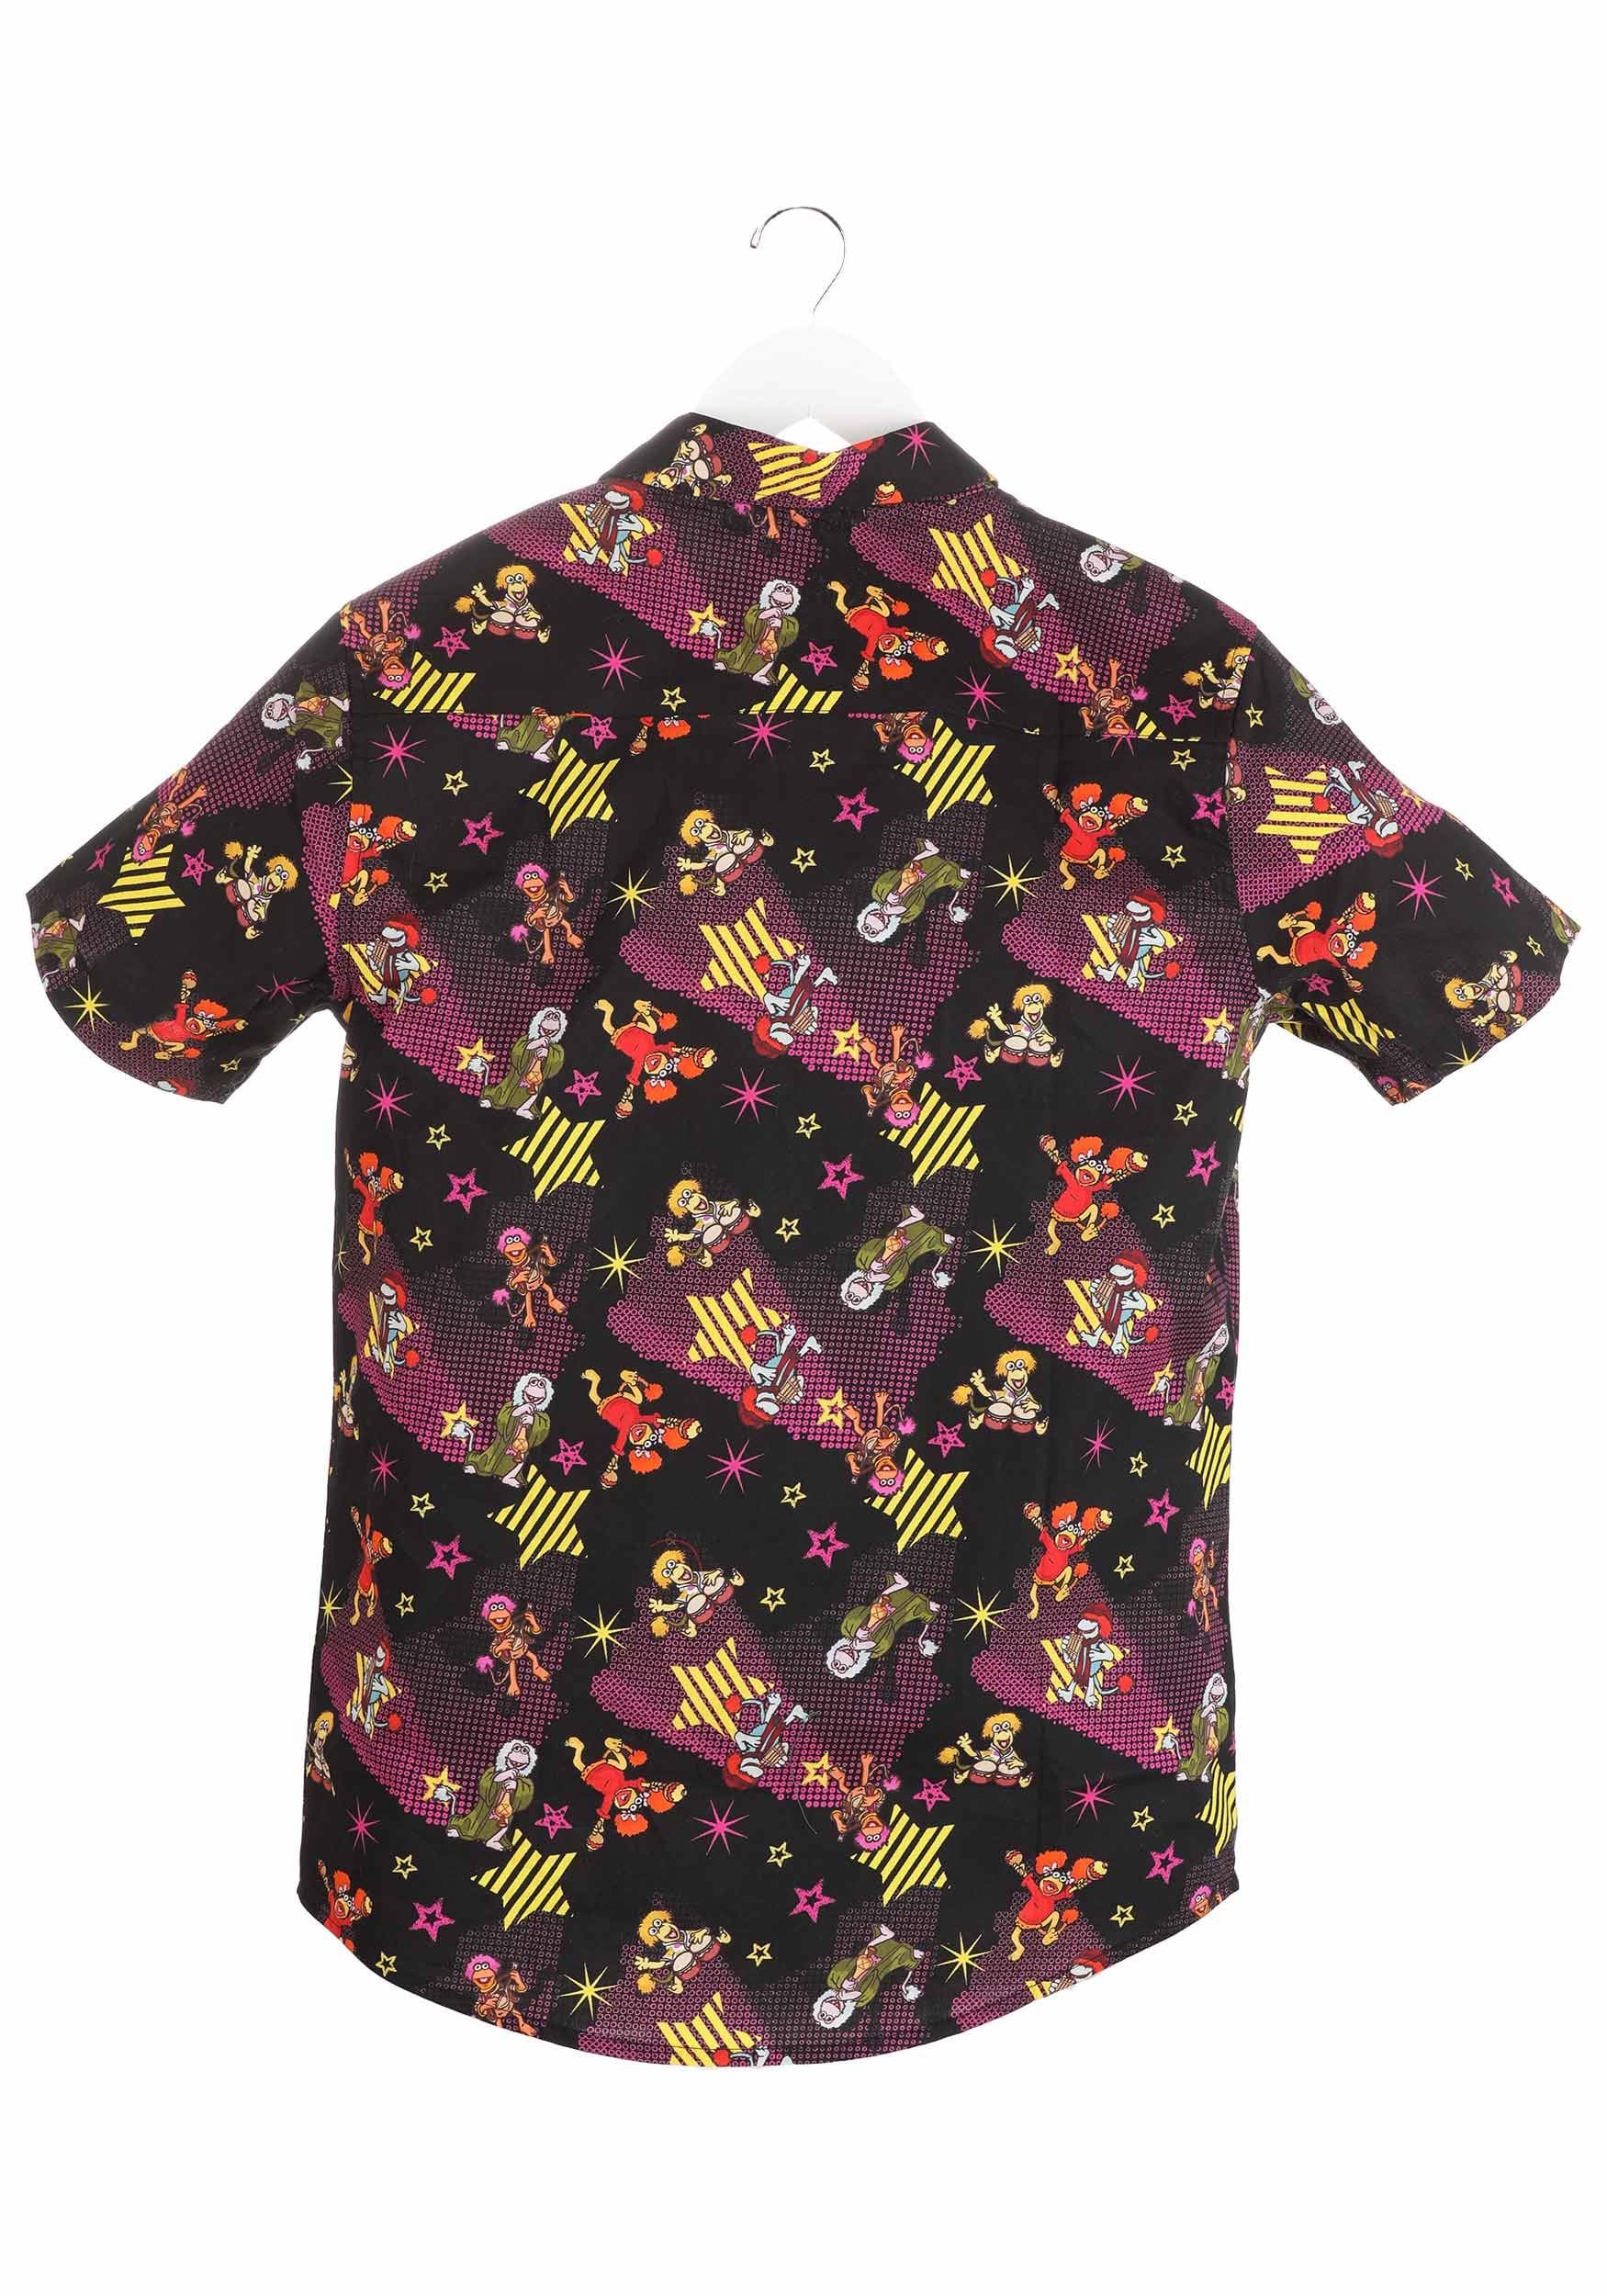 Getting Down In Fraggle Rock Shirt For Adults